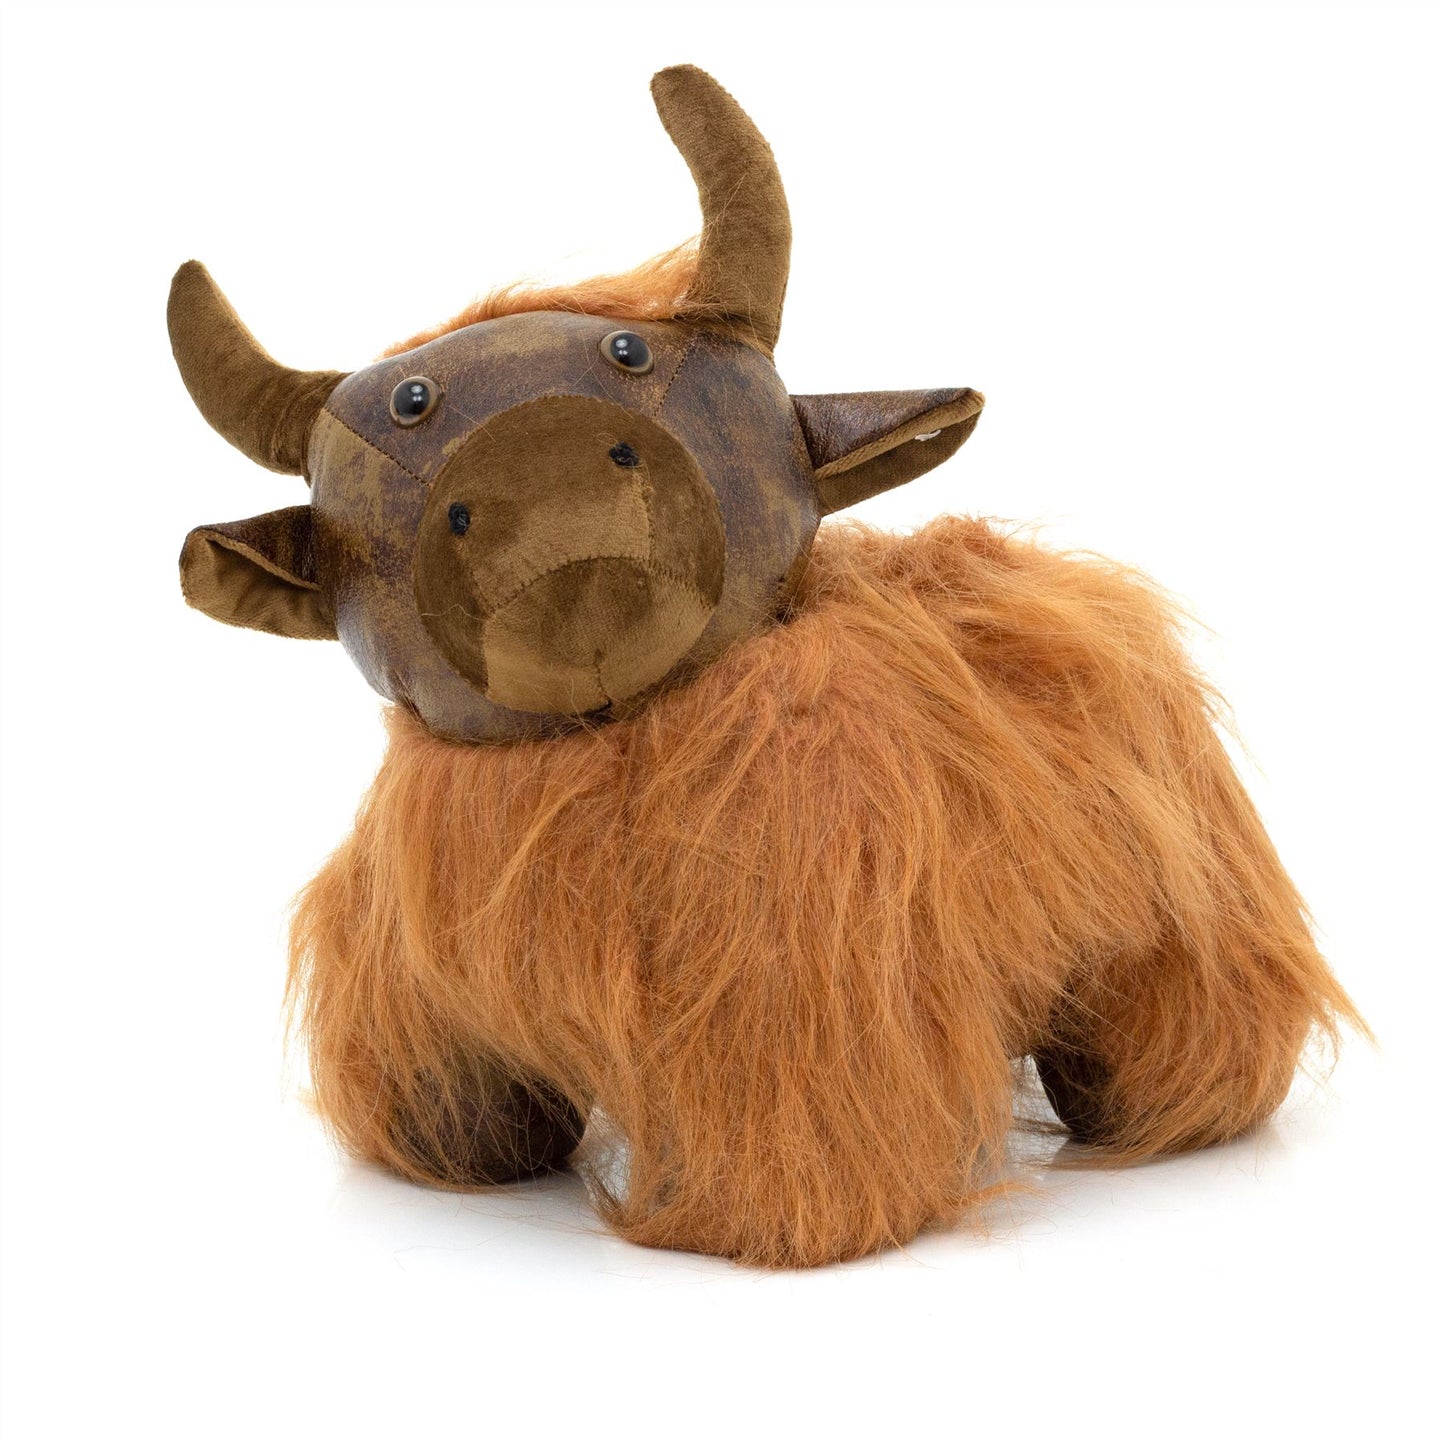 Angus Highland Cow Doorstop | Faux Leather Weighted Cow Animal Door Stop 1.8kg